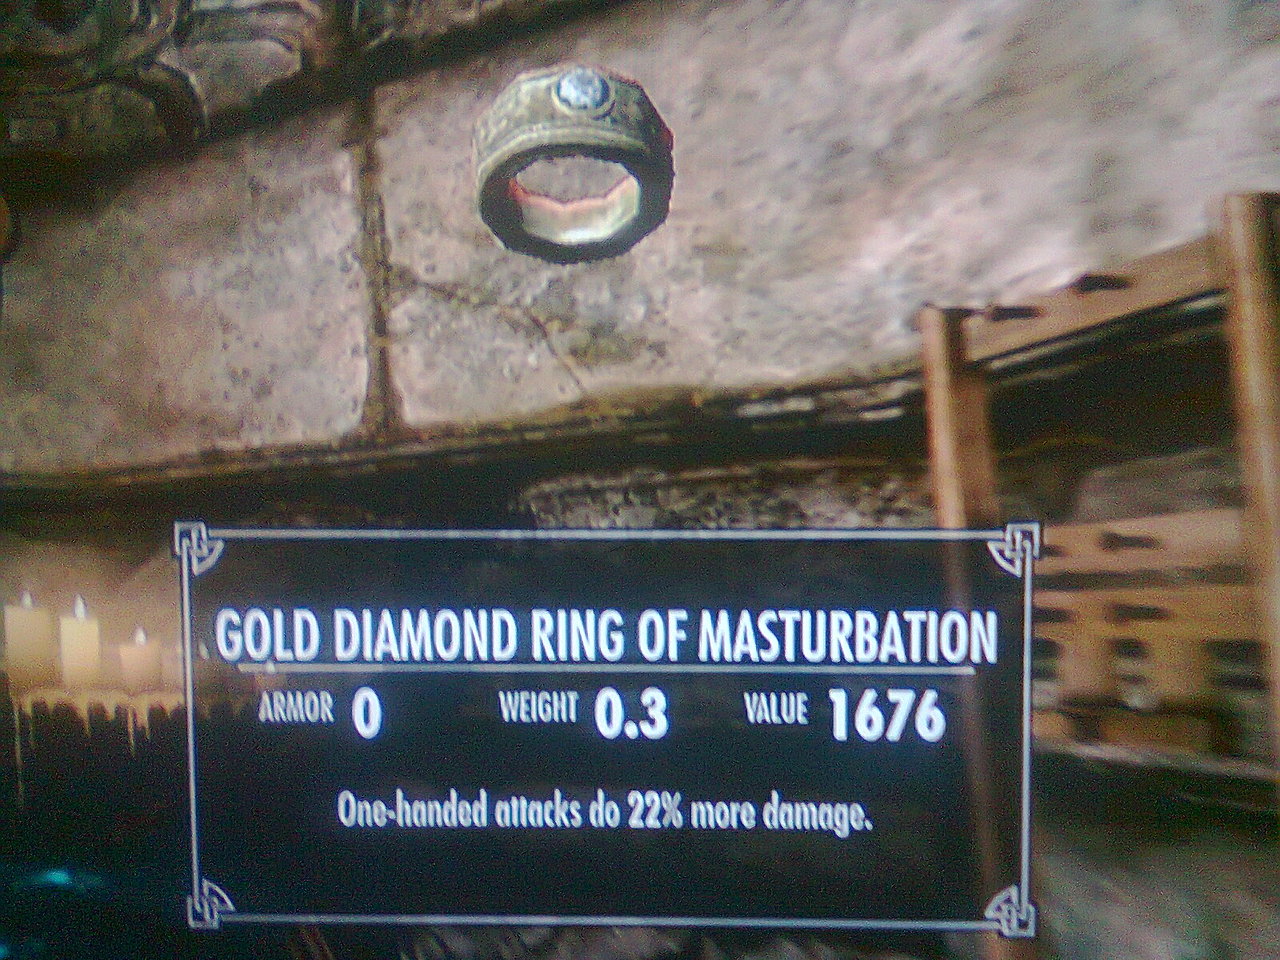 best armor in skyrim - Gold Diamond Ring Of Masturbation Armoro Weight 0.3 Value 1676 Onehanded attacks do 22% more damage.